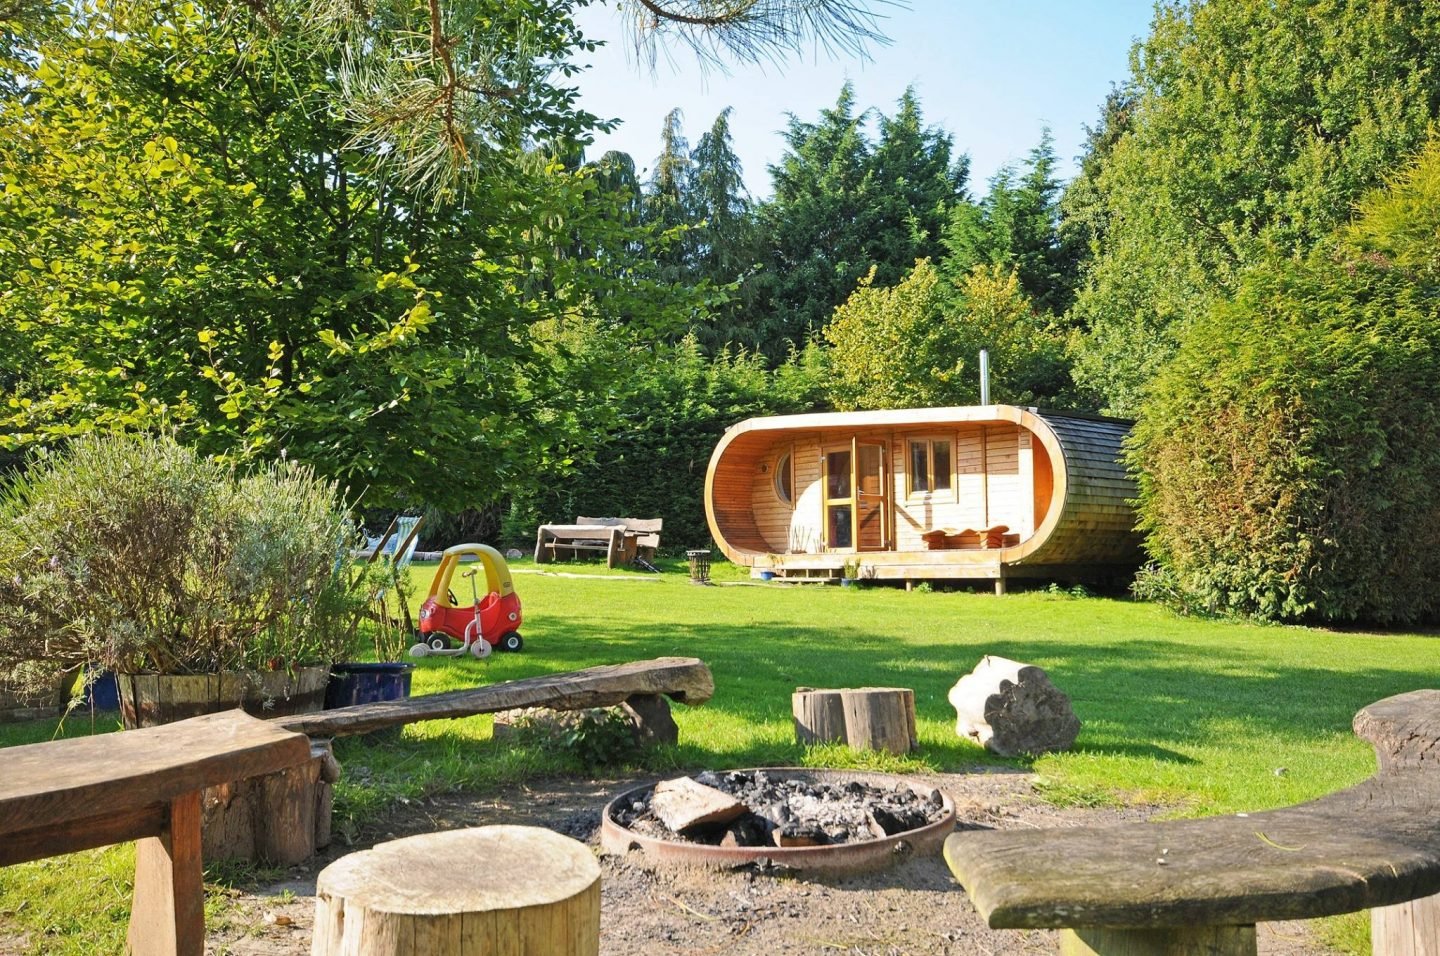 Three Luxury Glamping Experiences In The UK with Quality Unearthed www.extraordinarychaos.com